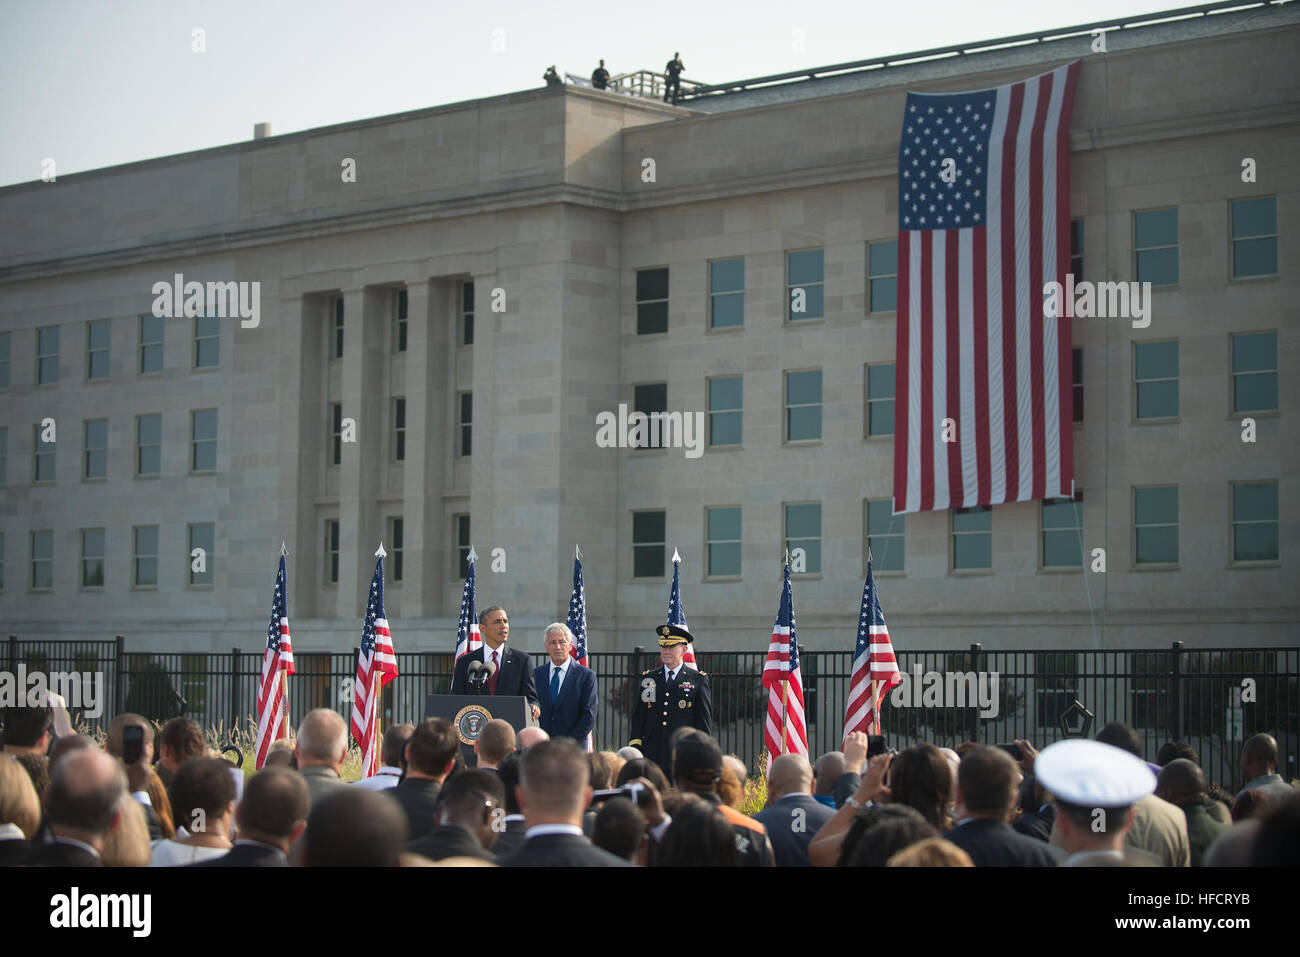 WASHINGTON (Sept. 11, 2013) President Barack Obama delivers remarks during a September 11, 2001 commemoration ceremony at the  Pentagon. With the president are Secretary of Defense Chuck Hagel and Chairman of the Joint Chiefs of Staff Gen. Martin E. Dempsey. (U.S. Navy photo by Mass Communication Specialist 1st Class Arif Patani/Released) 130911-N-PM781-002 Join the conversation http://www.navy.mil/viewGallery.asp http://www.facebook.com/USNavy http://www.twitter.com/USNavy http://navylive.dodlive.mil http://pinterest.com https://plus.google.com President Barack Obama speaks at the Pentagon. ( Stock Photo